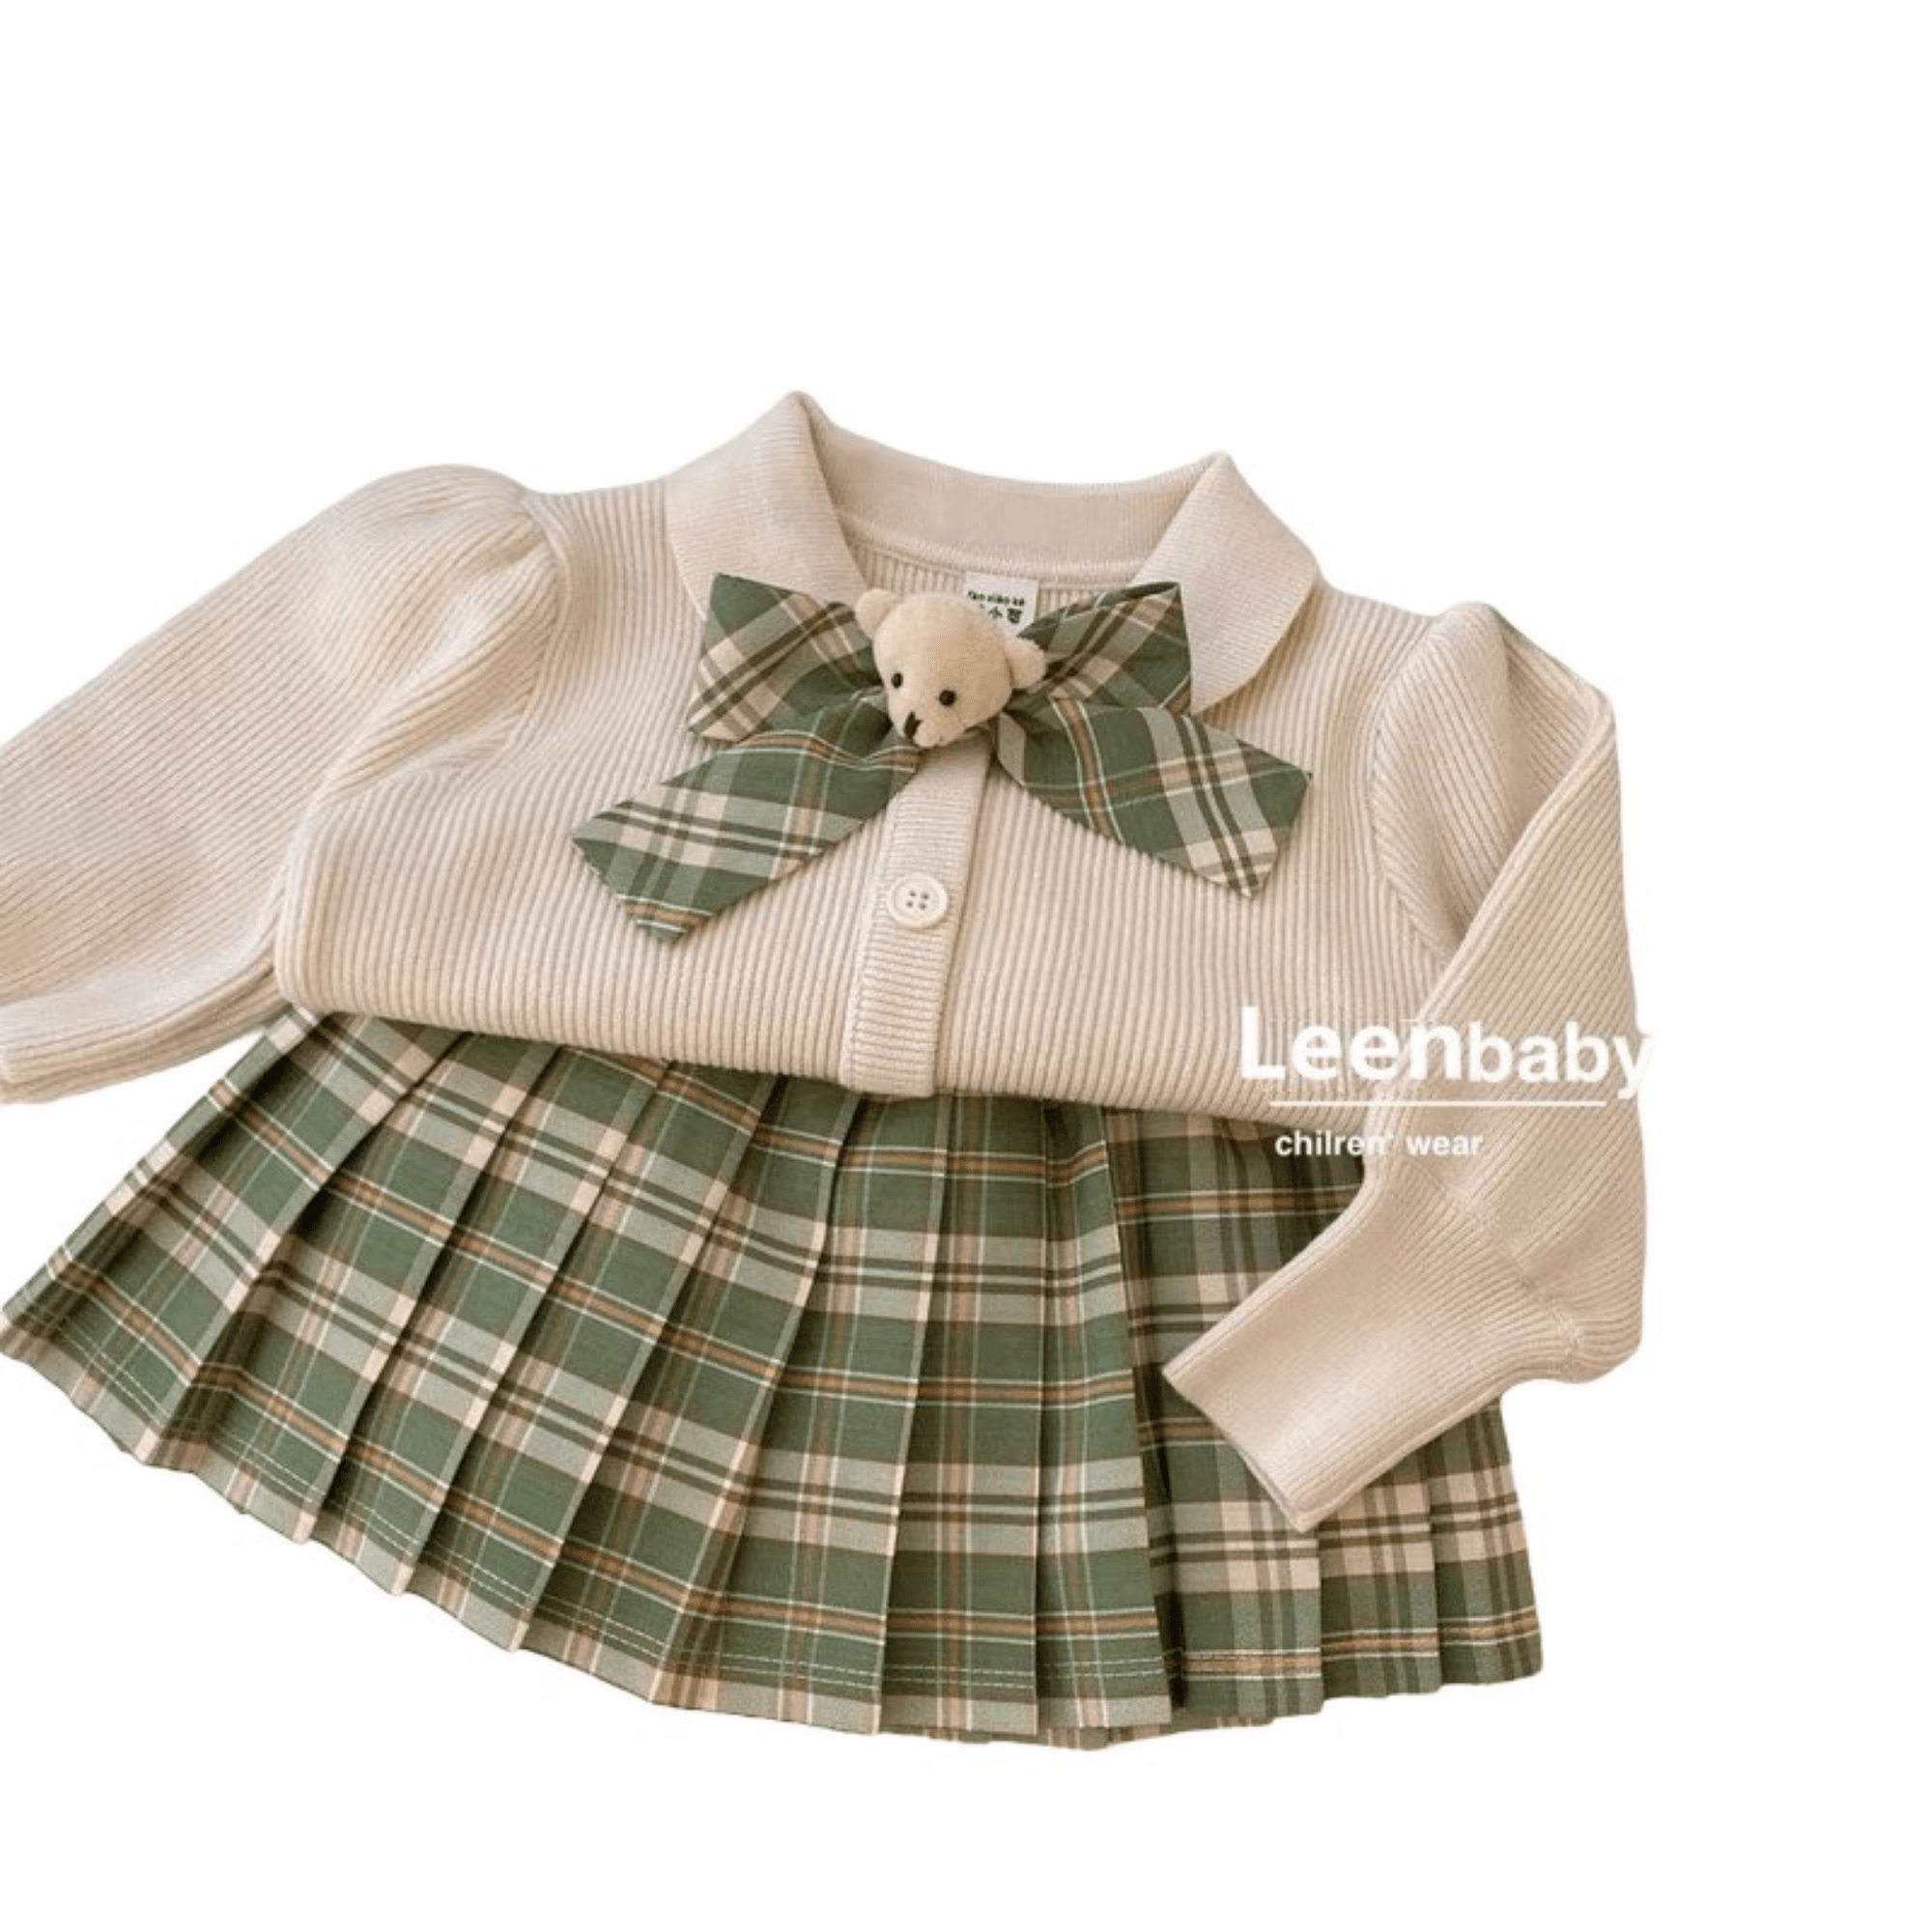 Clothes For Kids Girls Comfortable Natural Dresses Cute Each One In Opp Bag From Vietnam Manufacturer